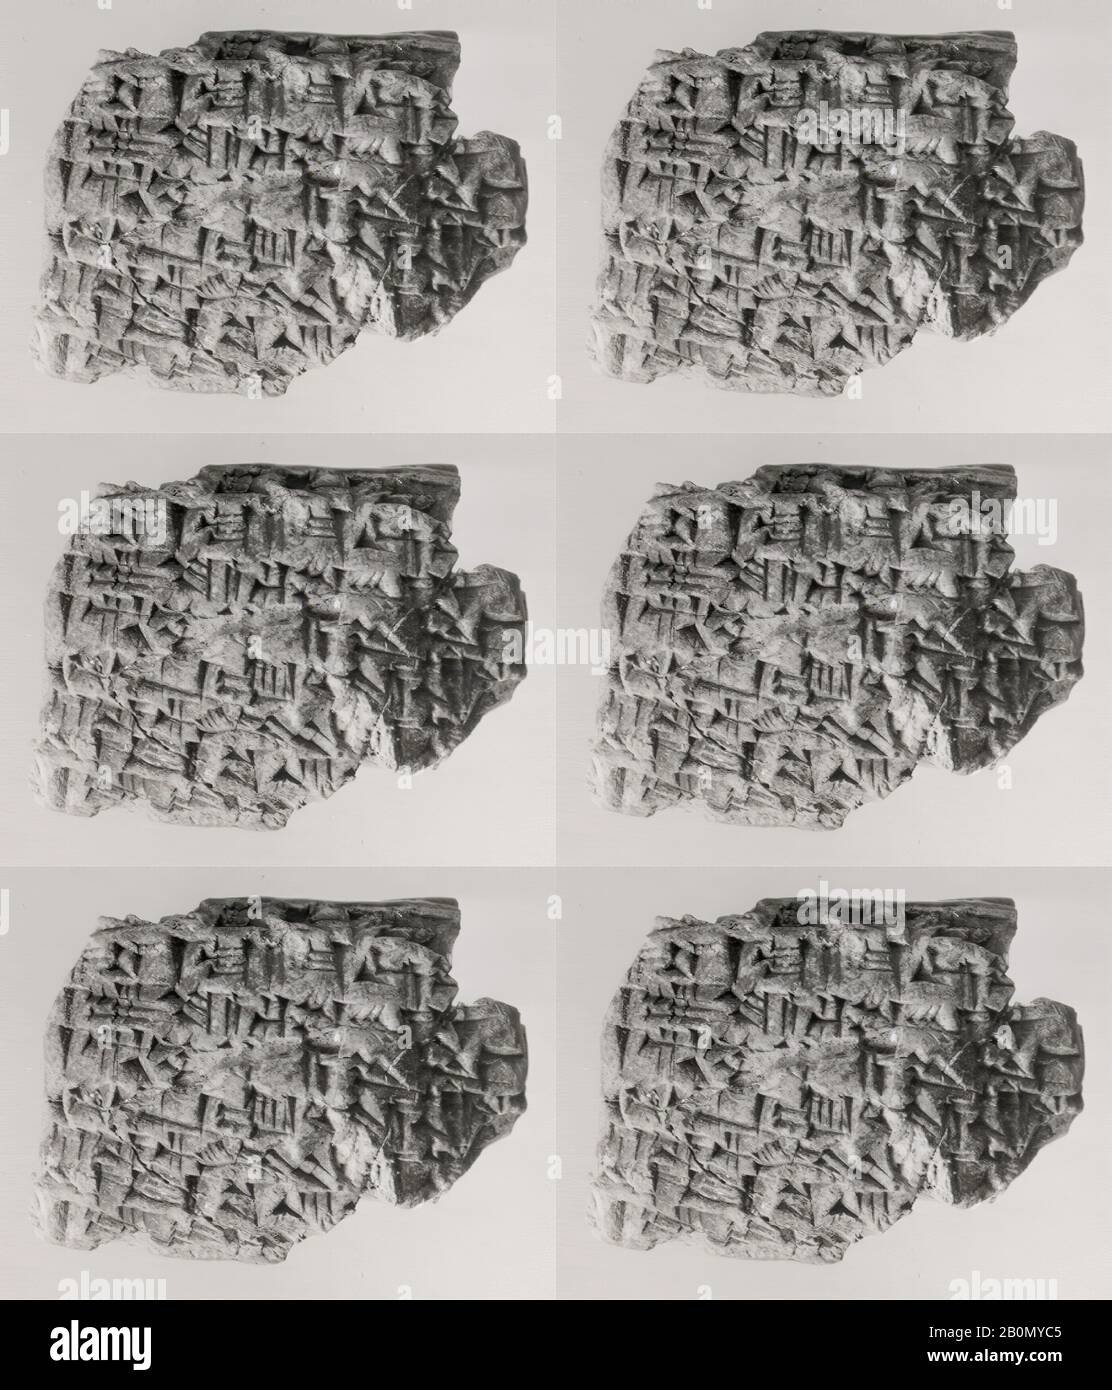 Cuneiform tablet: quittance (?), Esagilaya archive, Babylonian, Neo-Babylonian, Date ca. 555–539 B.C., Mesopotamia, probably from Babylon (modern Hillah), Babylonian, Clay, 4 x 5.3 x 2 cm (1 5/8 x 2 1/8 x 3/4 in.), Clay-Tablets-Inscribed Stock Photo